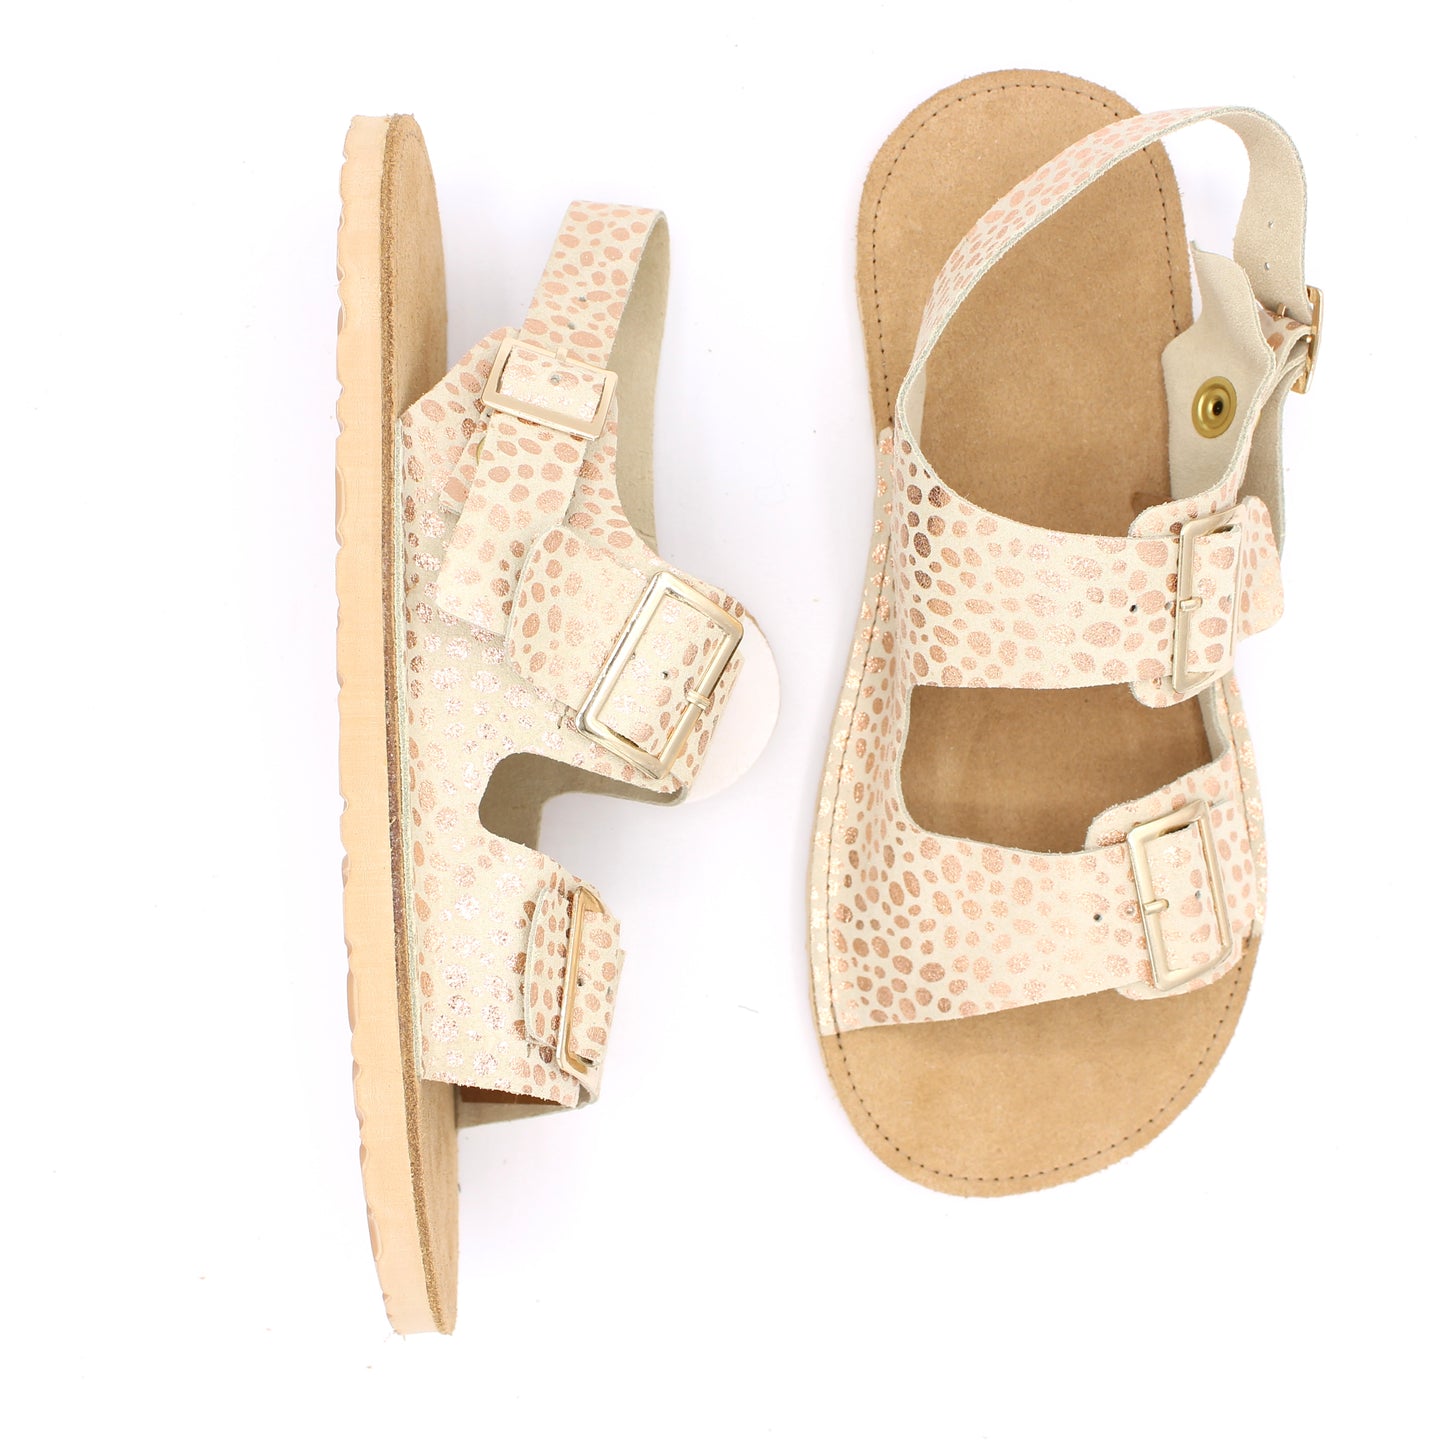 Ladies Buckle Sandals with Snaps - Rosie Dalmation - Rugged Soles